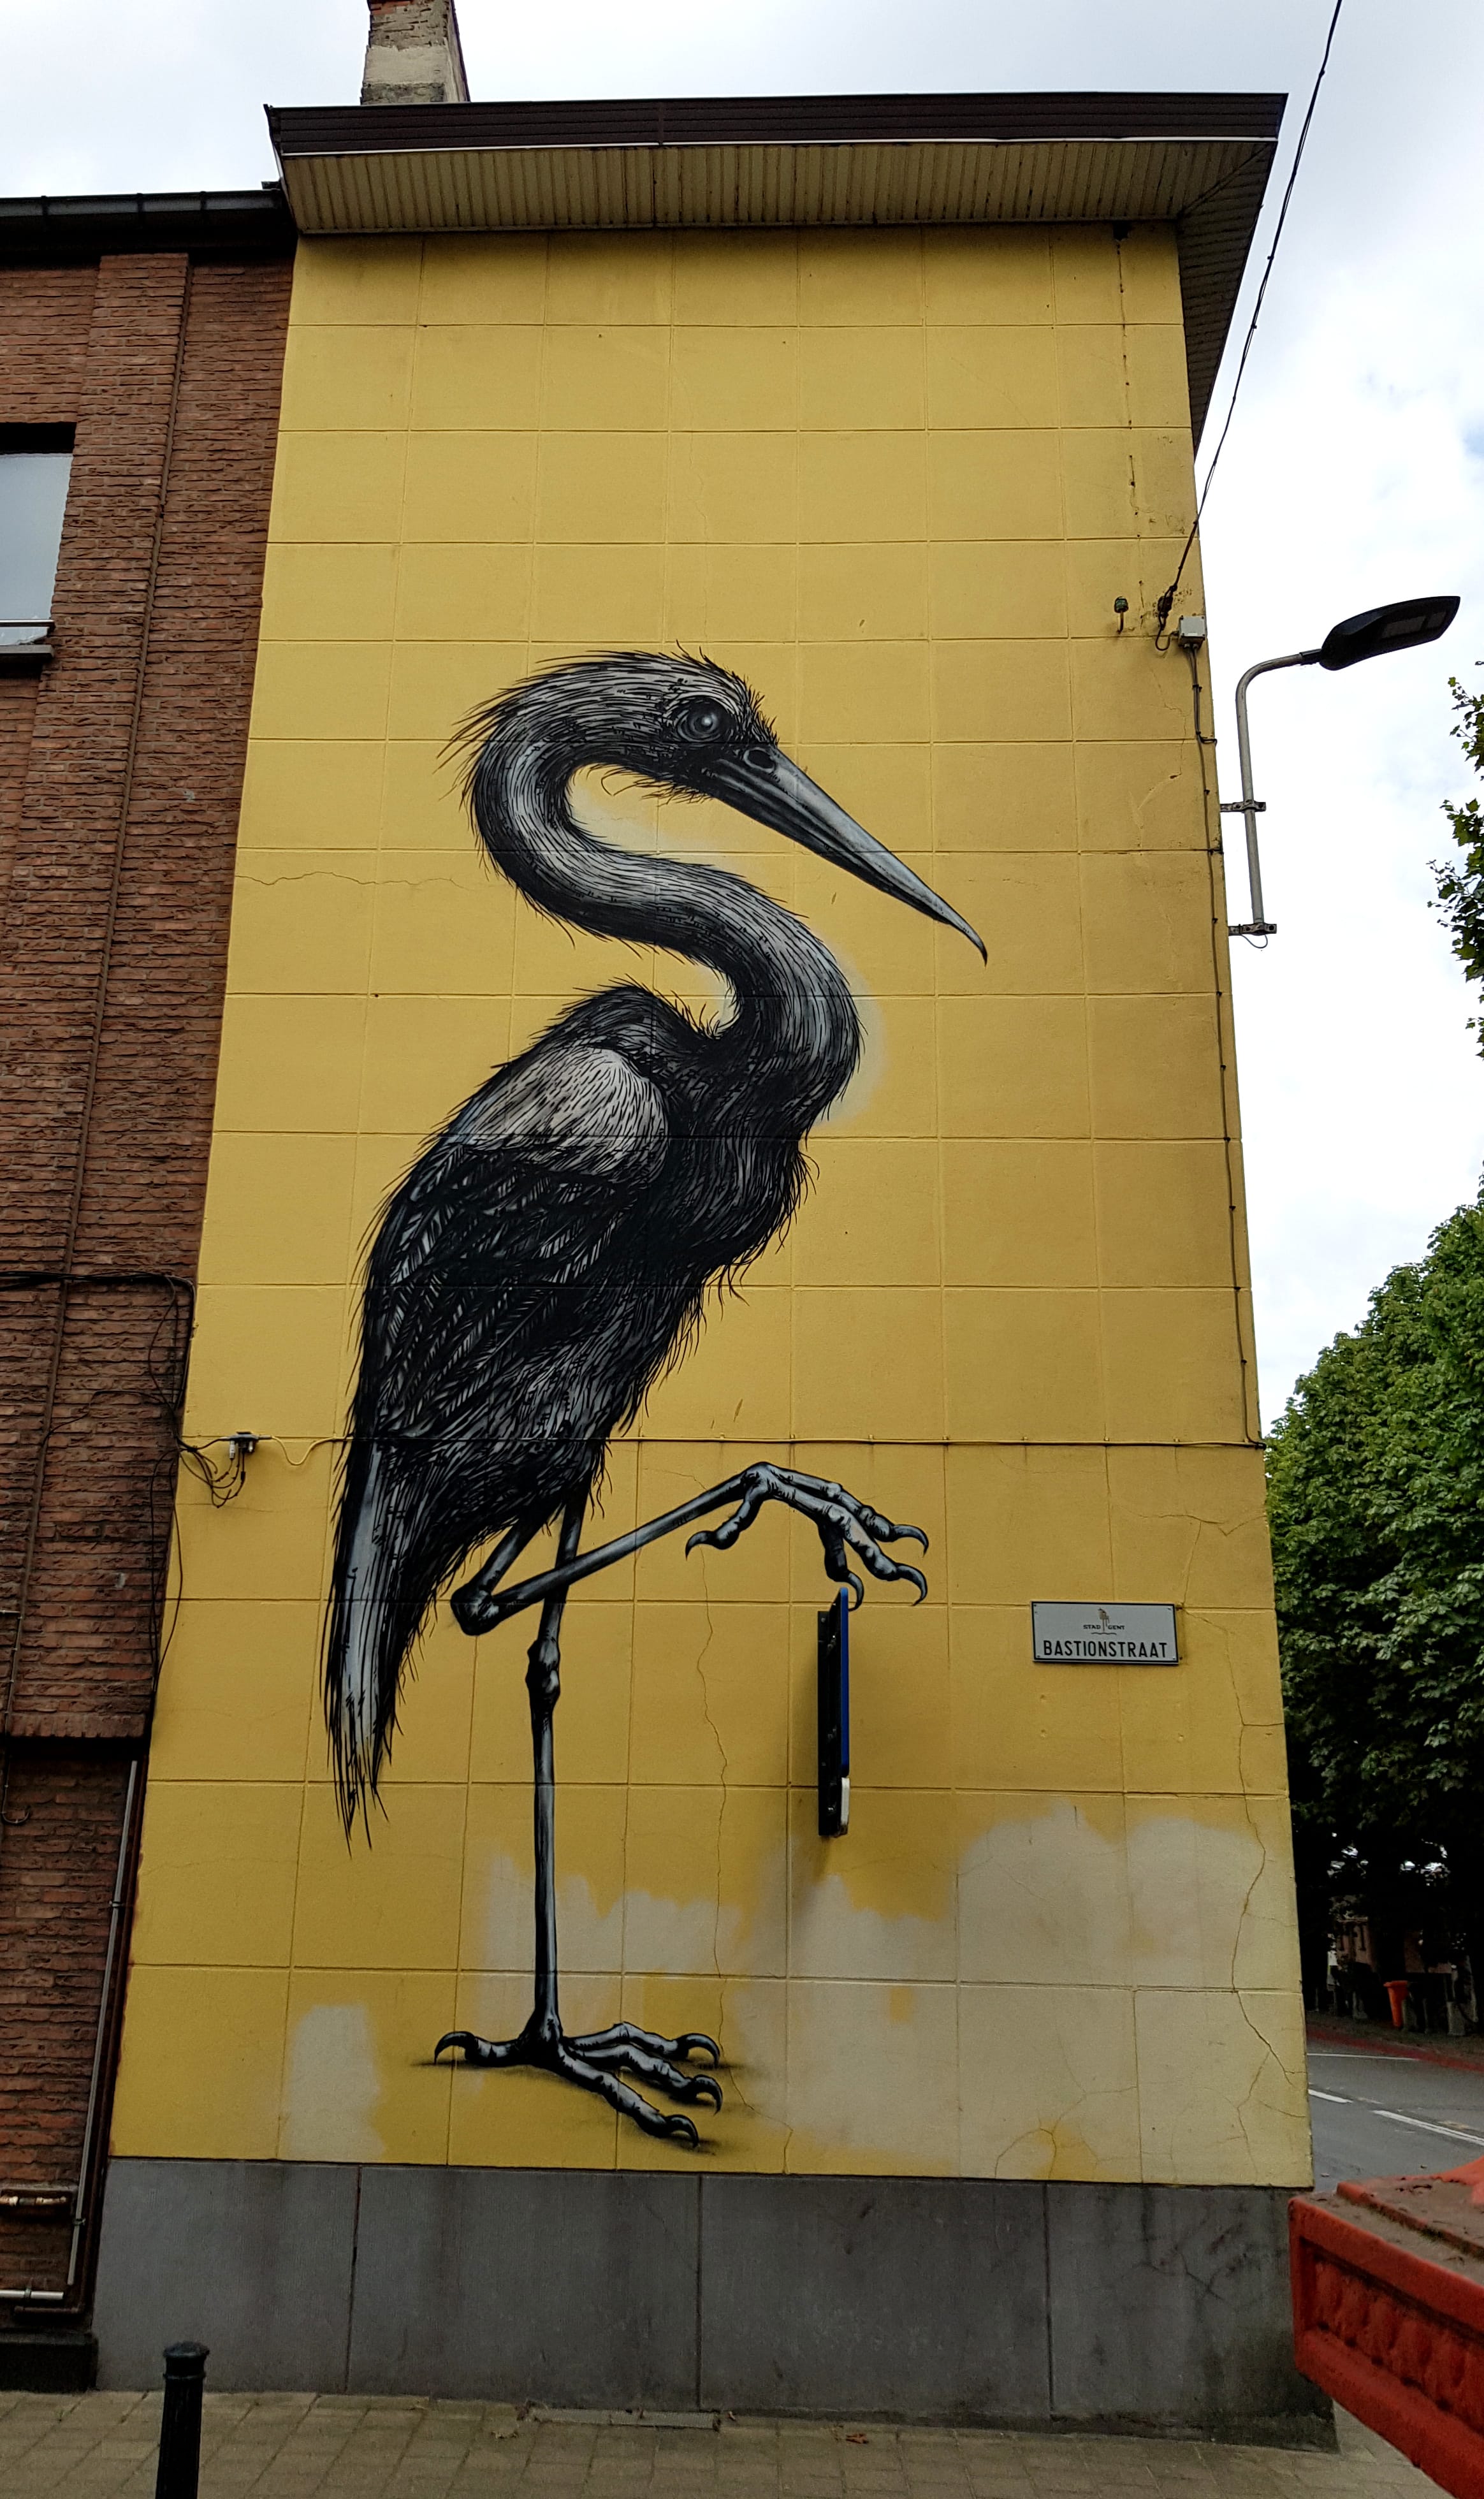 Graffiti 6328  by the artist Roa captured by Mephisroth in Gent Belgium